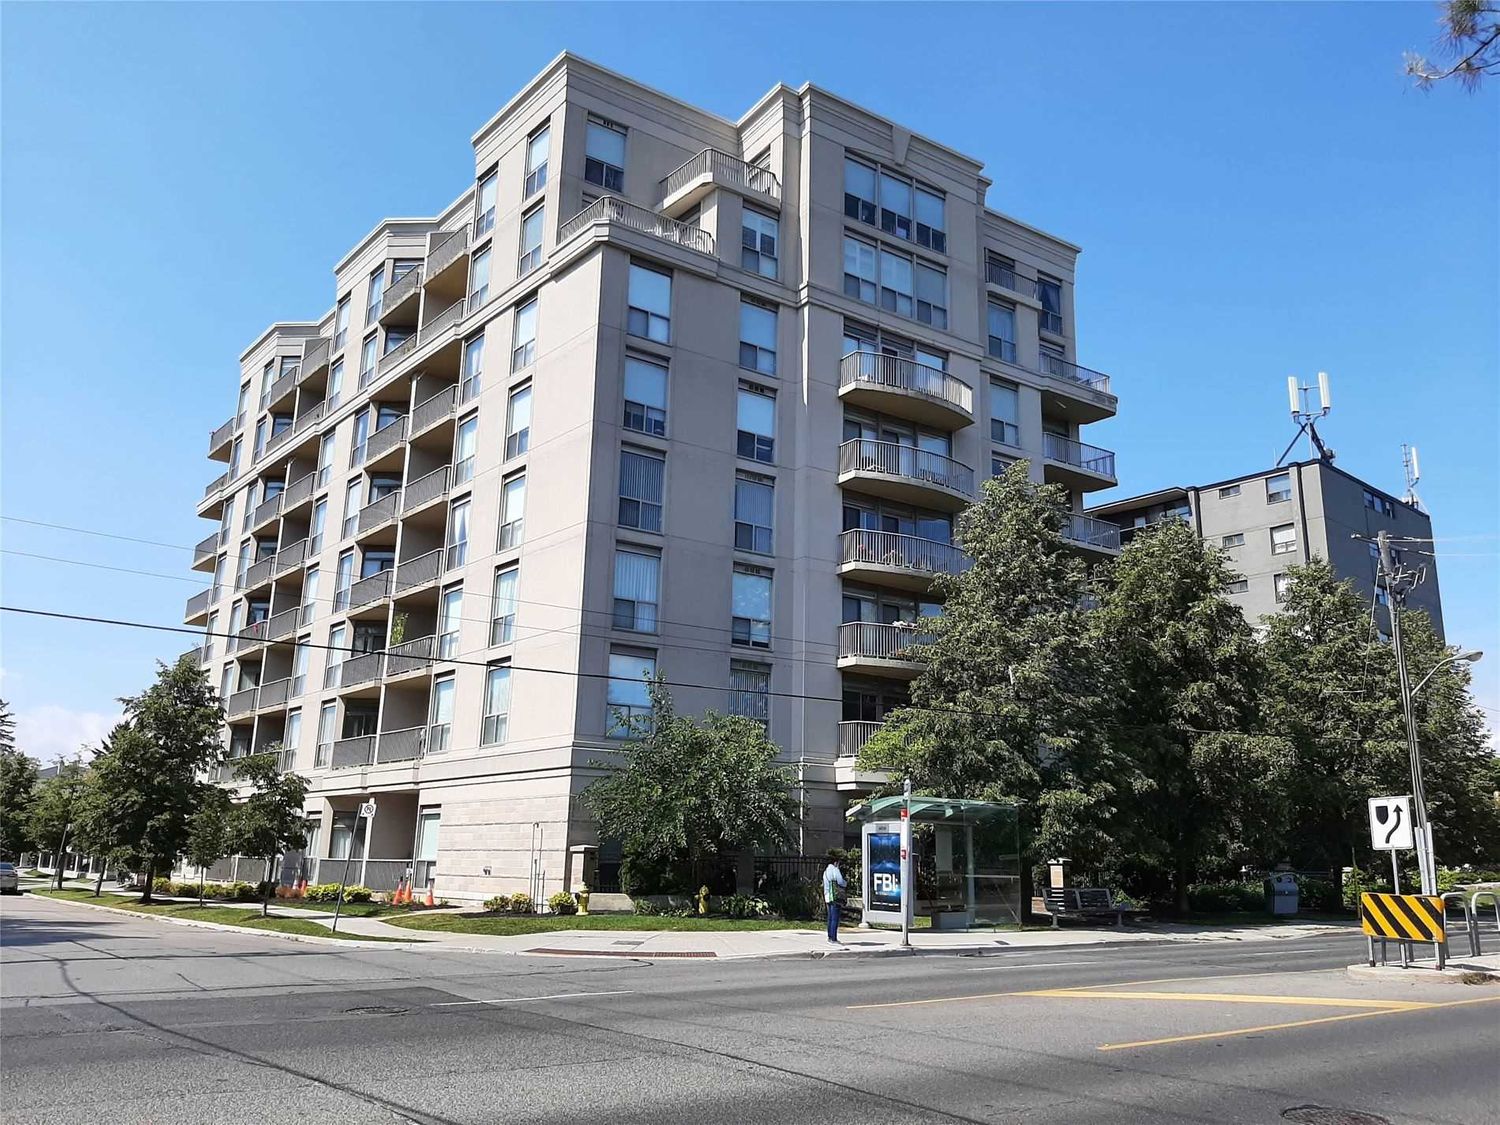 4200 Bathurst Street. Park Place Condos is located in  North York, Toronto - image #1 of 2